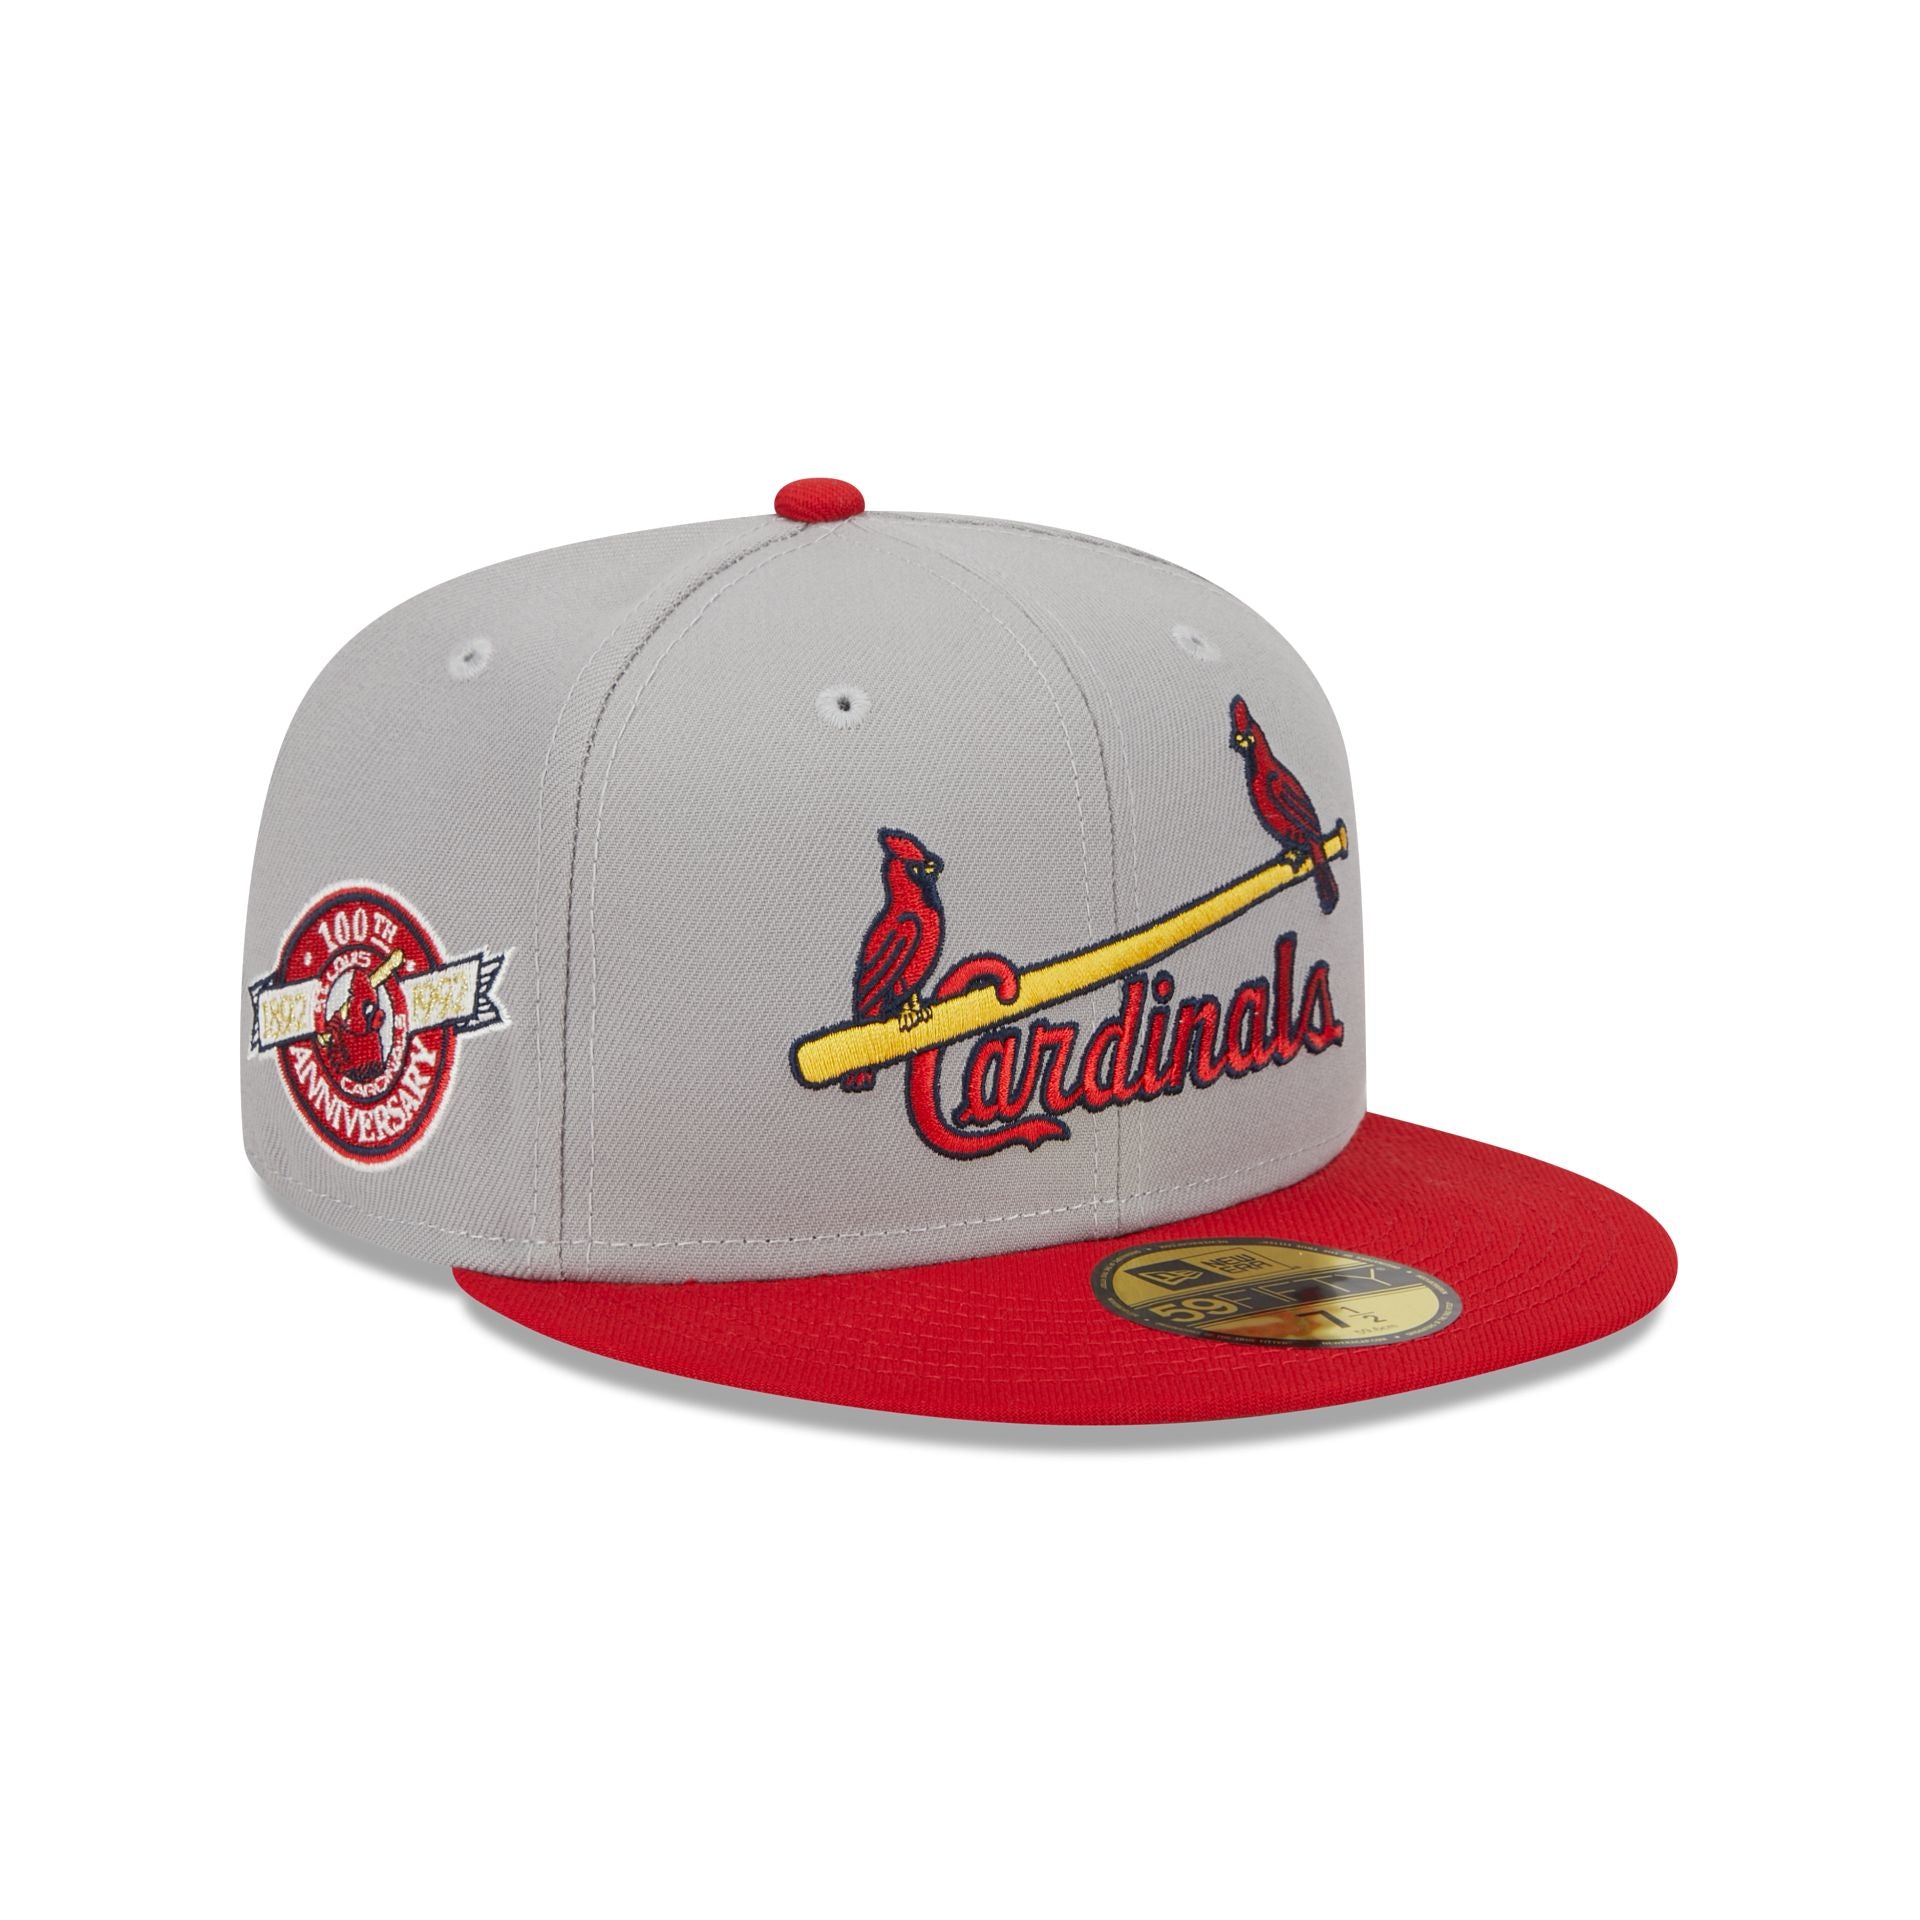 Infant New Era Red St. Louis Cardinals My First 9FIFTY Hat